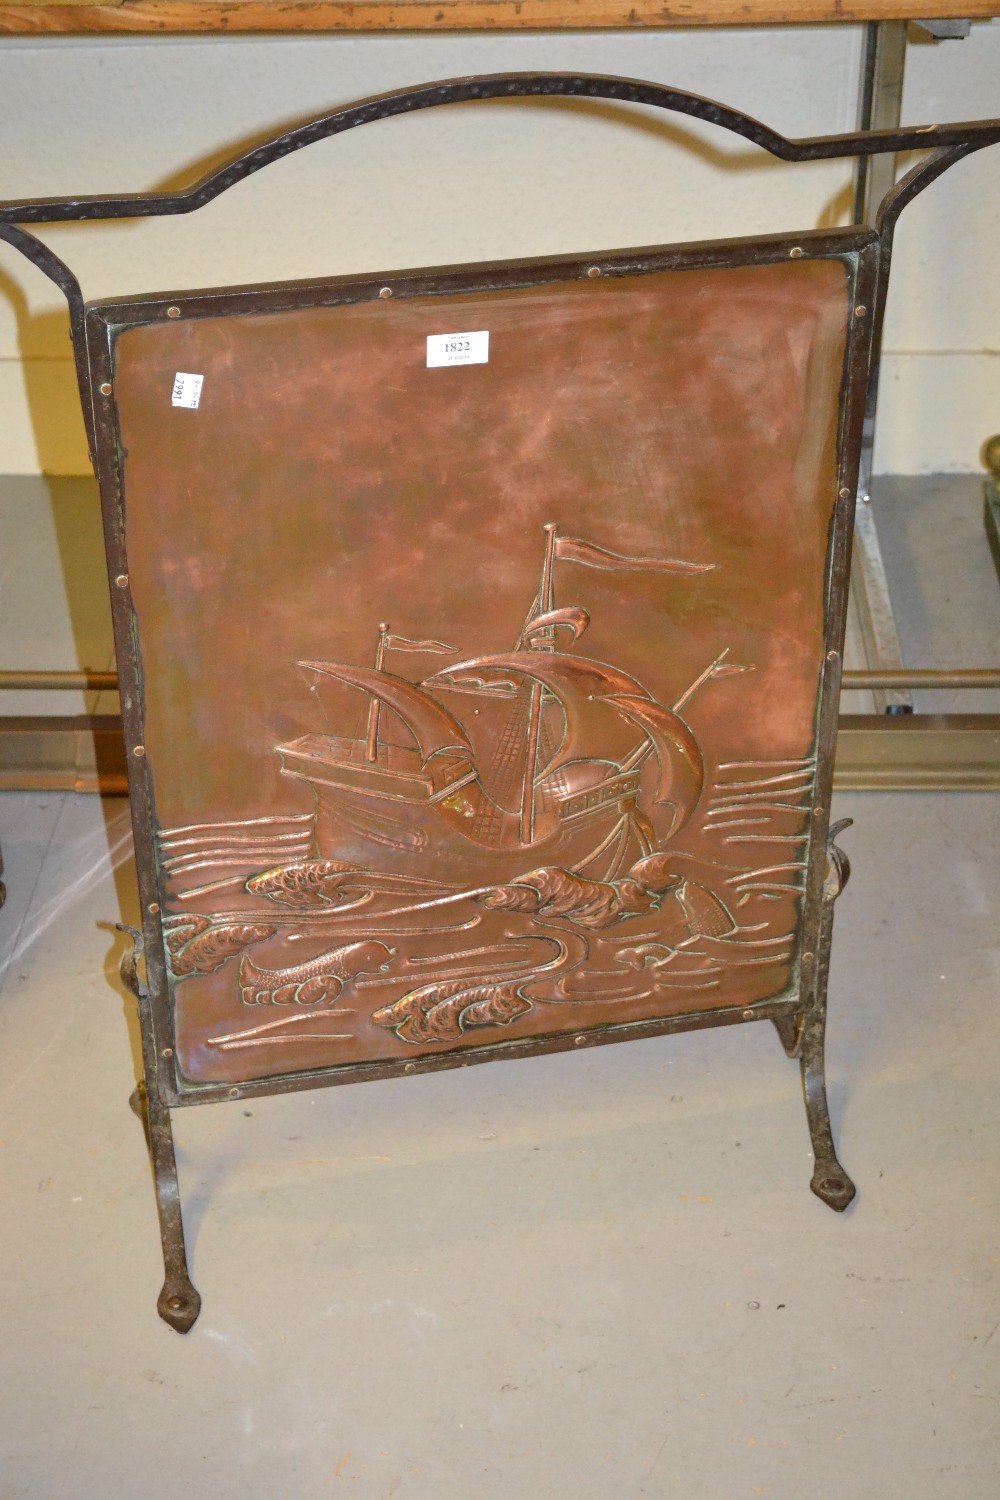 Newlyn type wrought iron and embossed copper firescreen decorated with a scene depicting a 16th